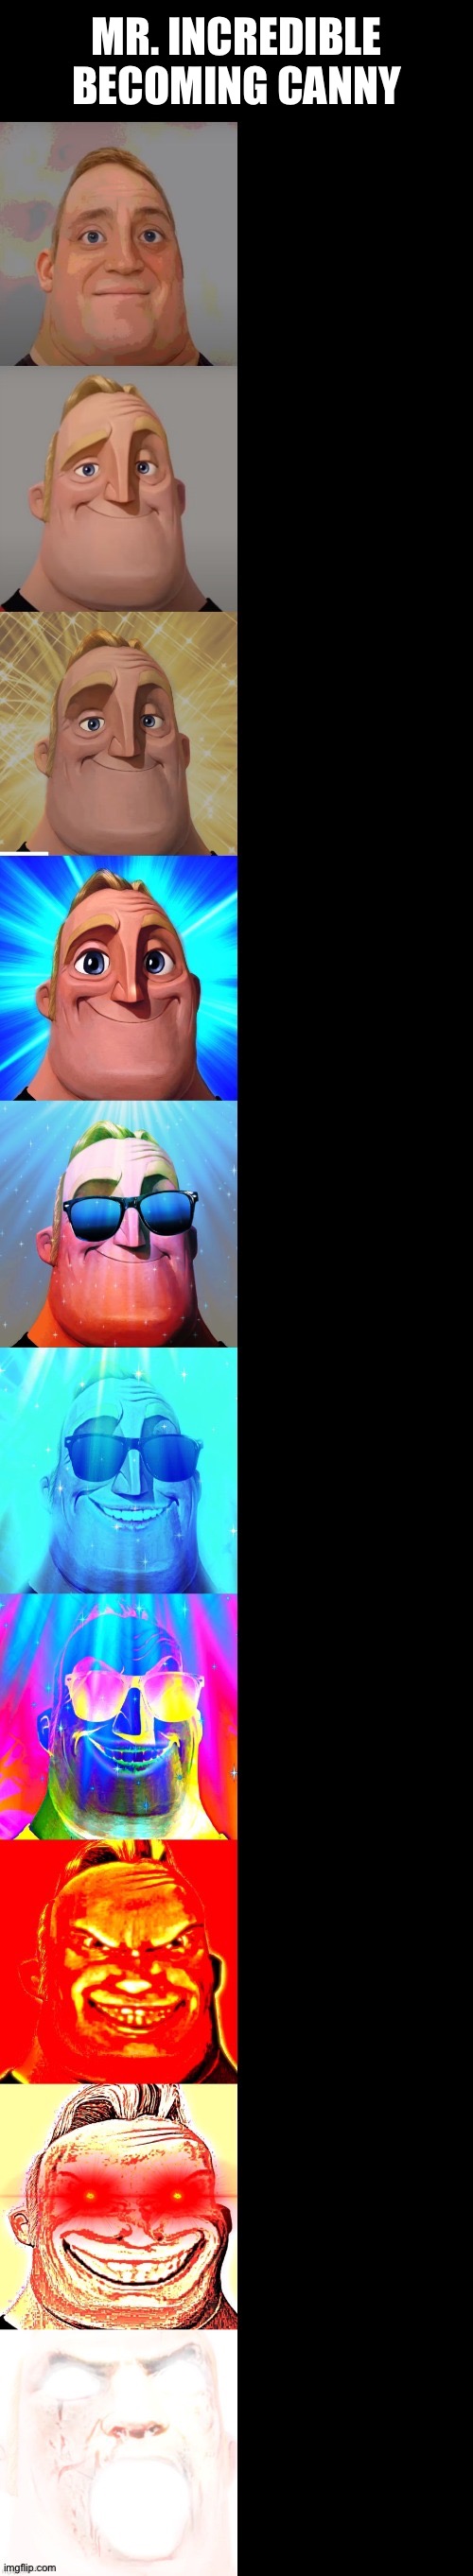 Mr. Incredible becoming canny | MR. INCREDIBLE BECOMING CANNY | image tagged in mr incredible becoming canny | made w/ Imgflip meme maker